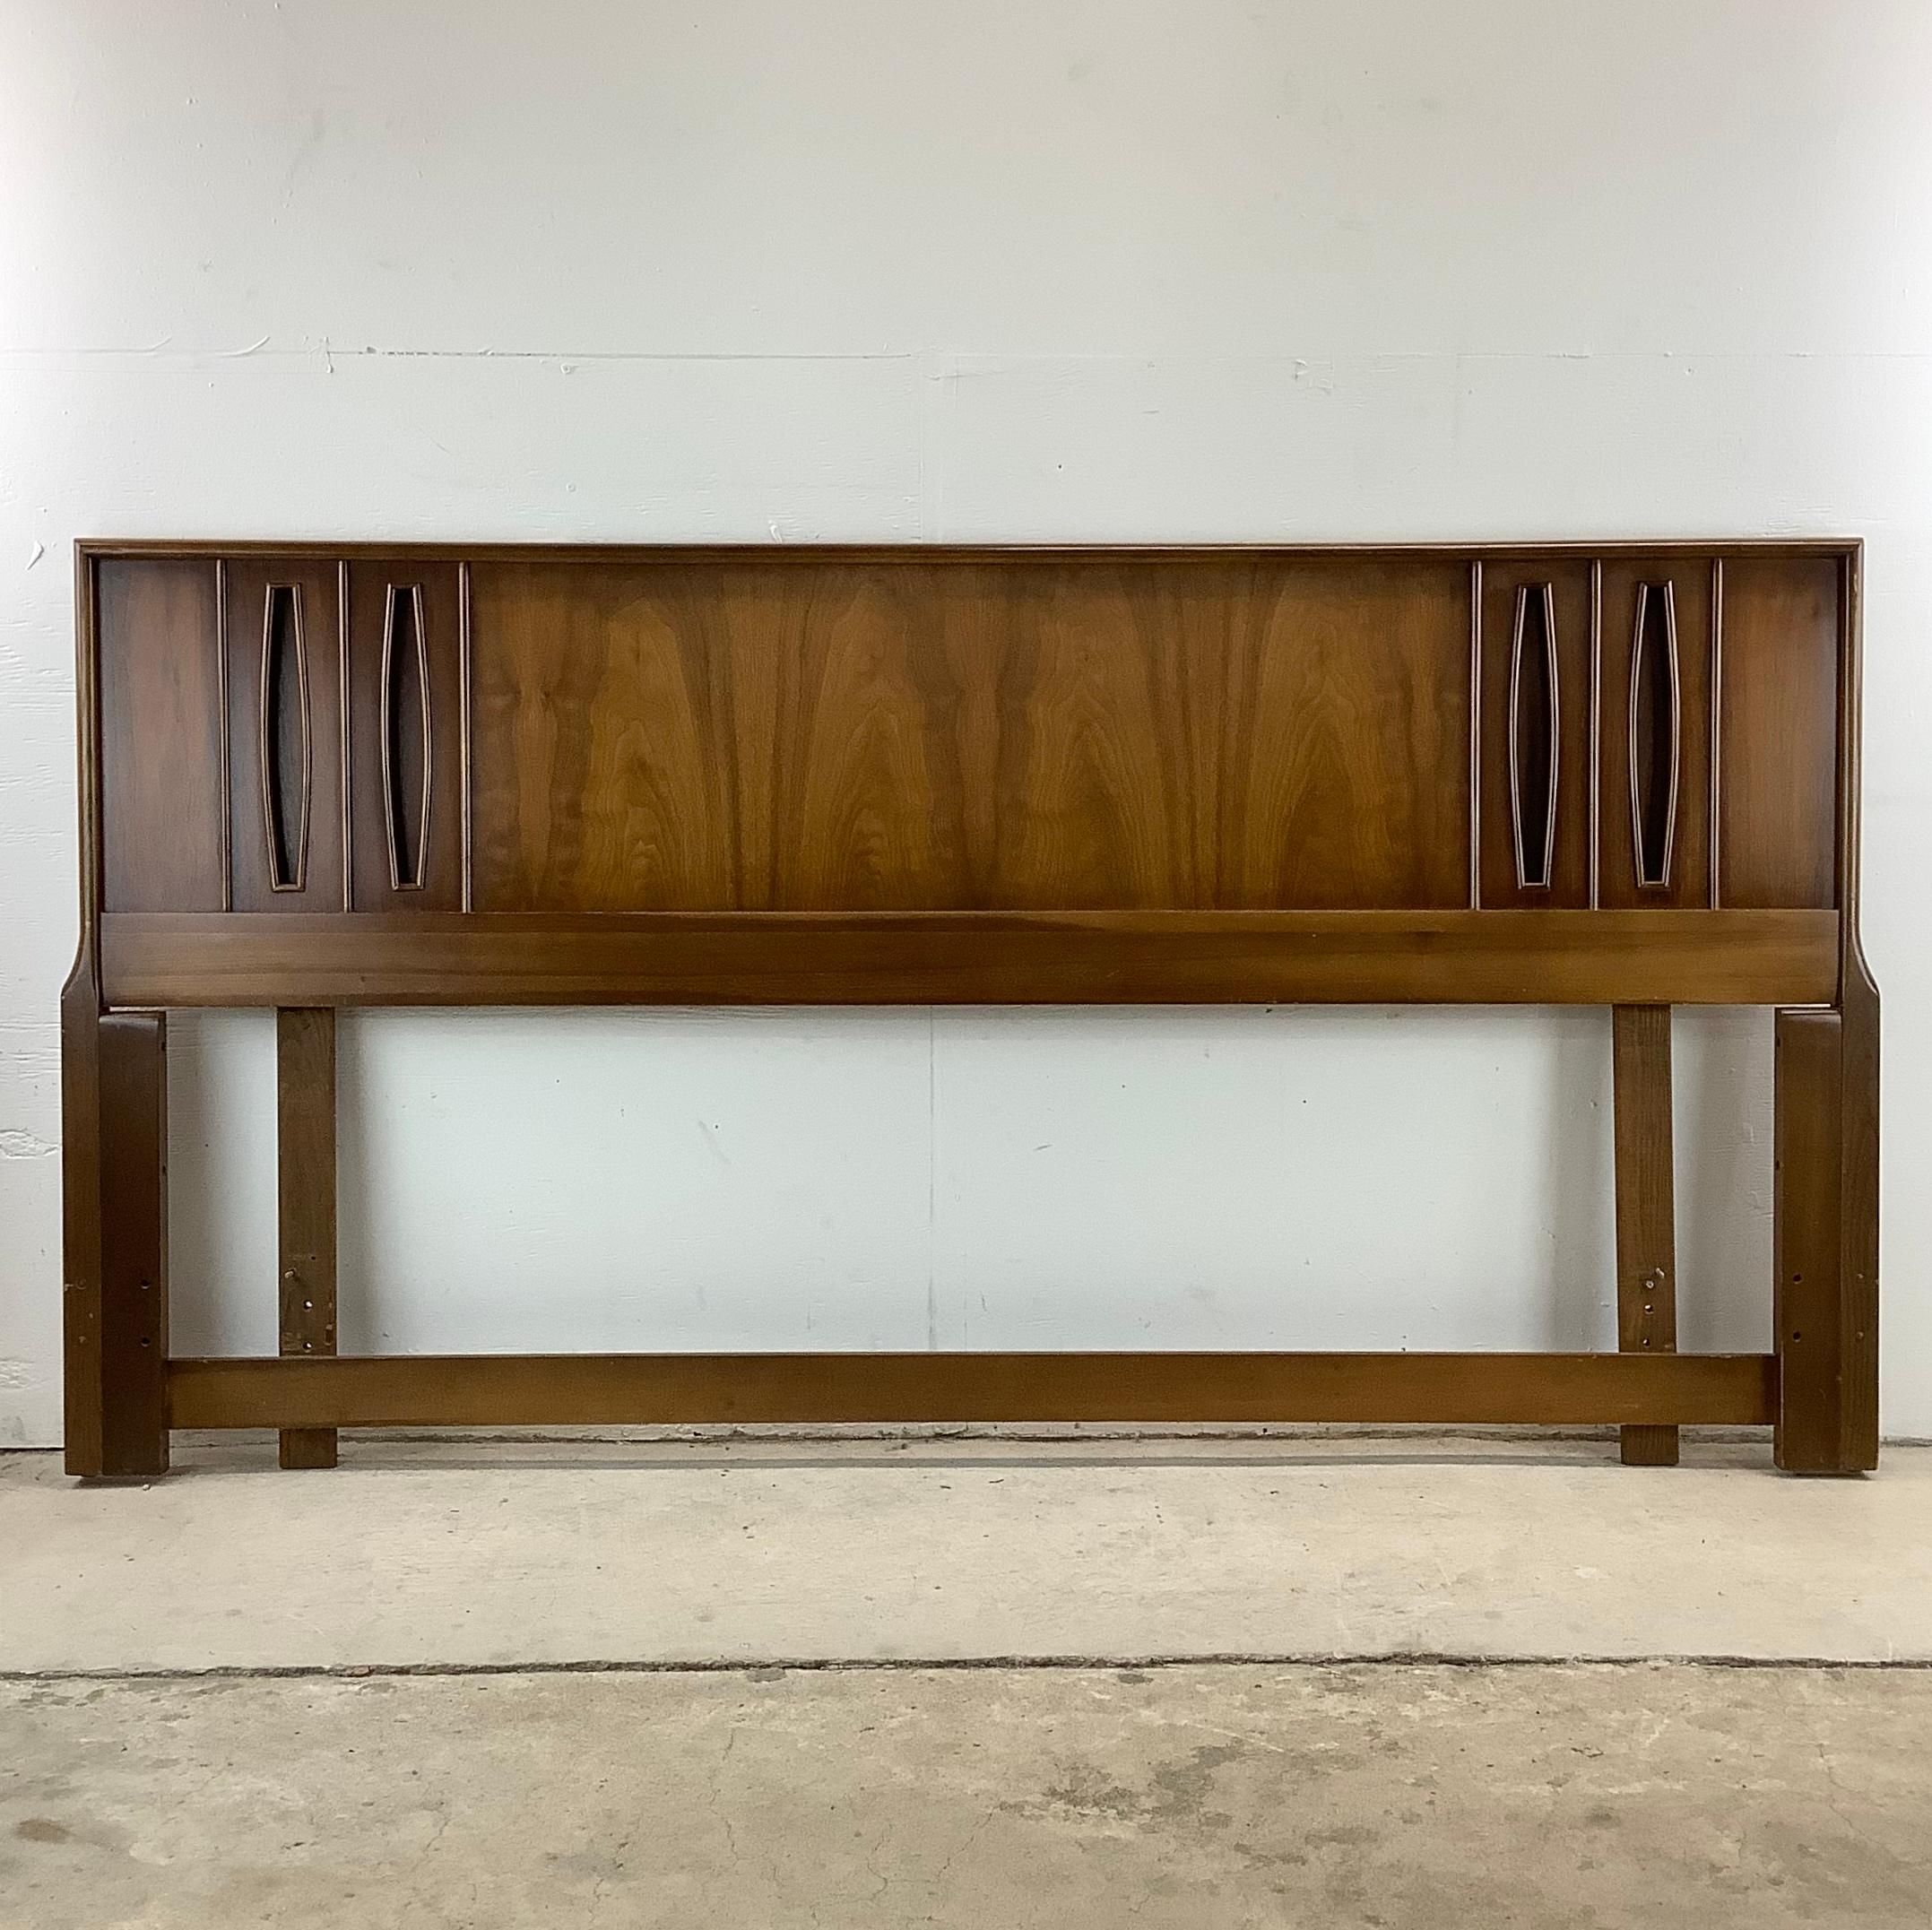 This exquisite Mid-Century Modern King Size Headboard captures the essence of a time when design transformed the mundane into the magnificent. Crafted from sumptuous vintage walnut, a wood revered for its rich hues and intricate grain patterns, this